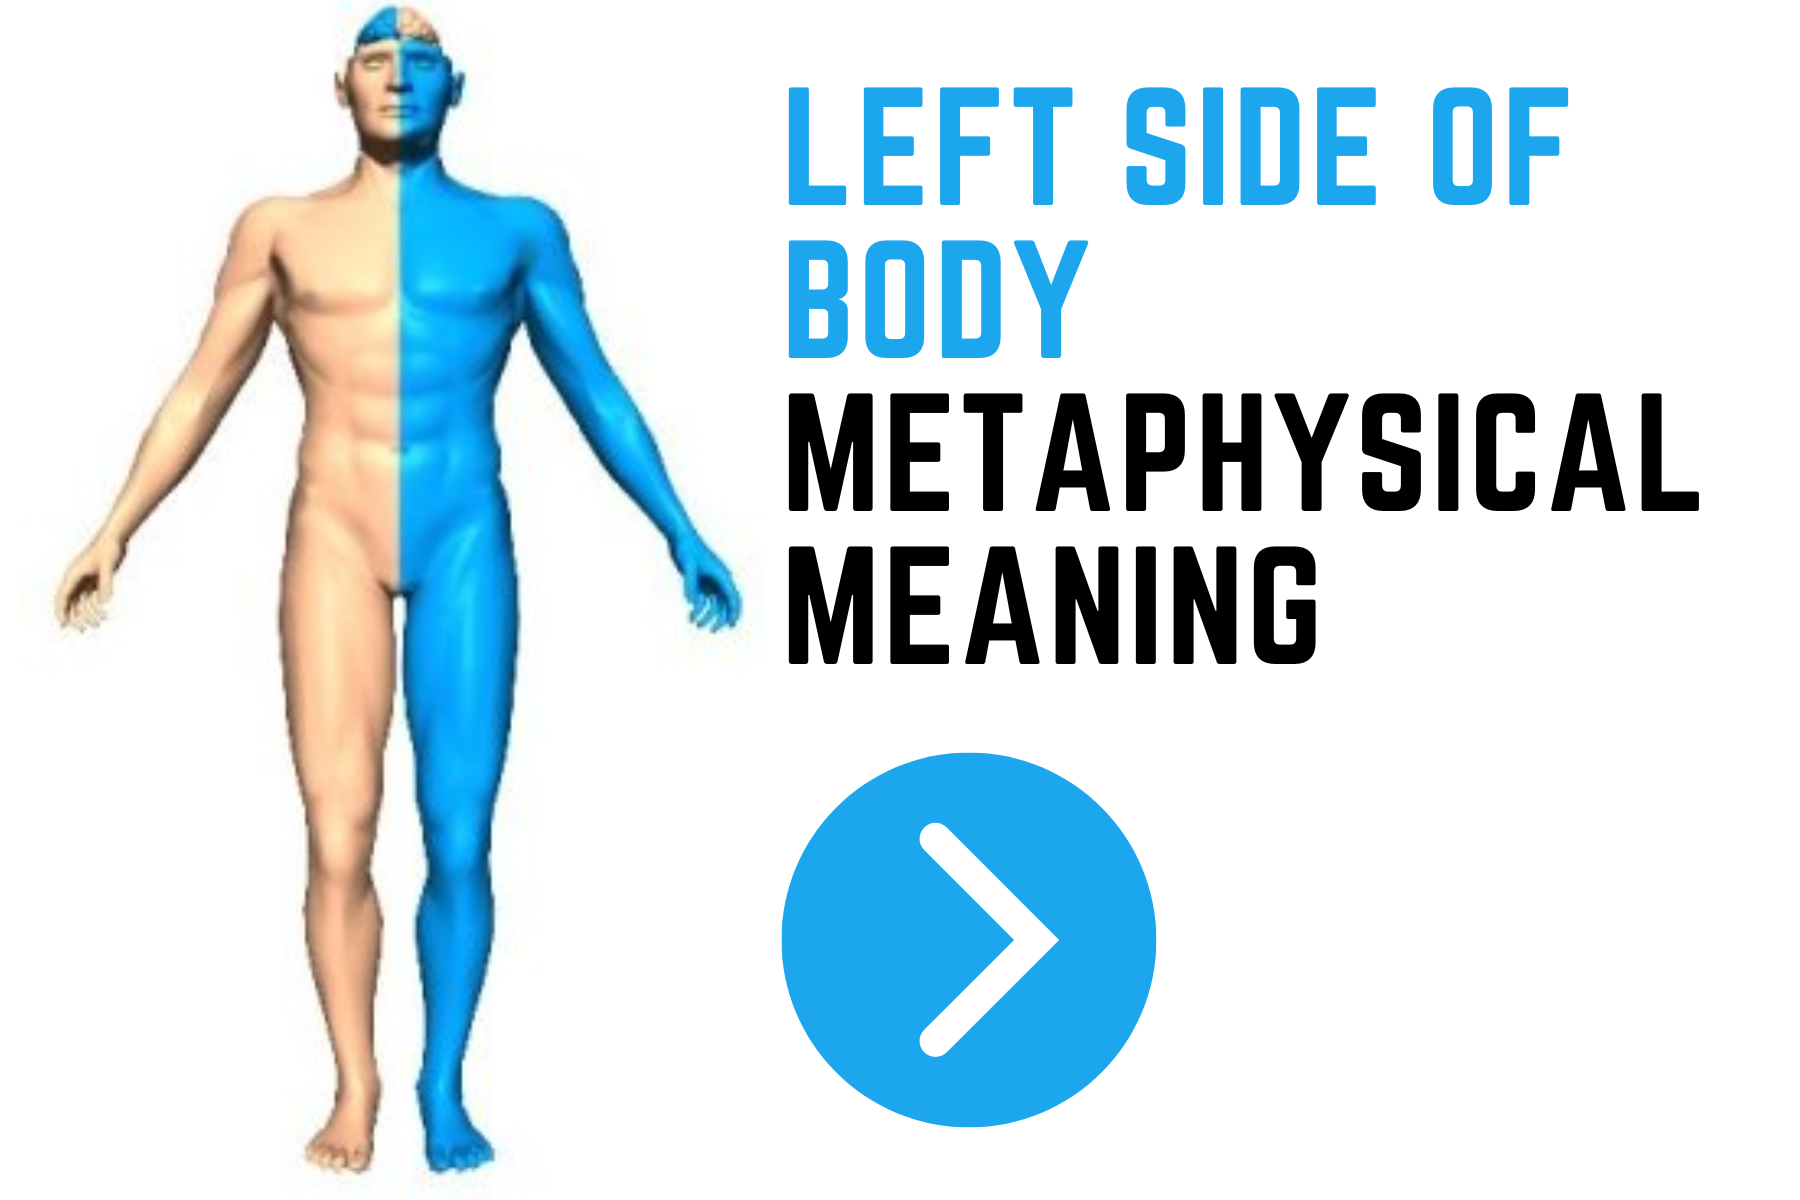 What Is The Left Side Of Body Metaphysical Meaning